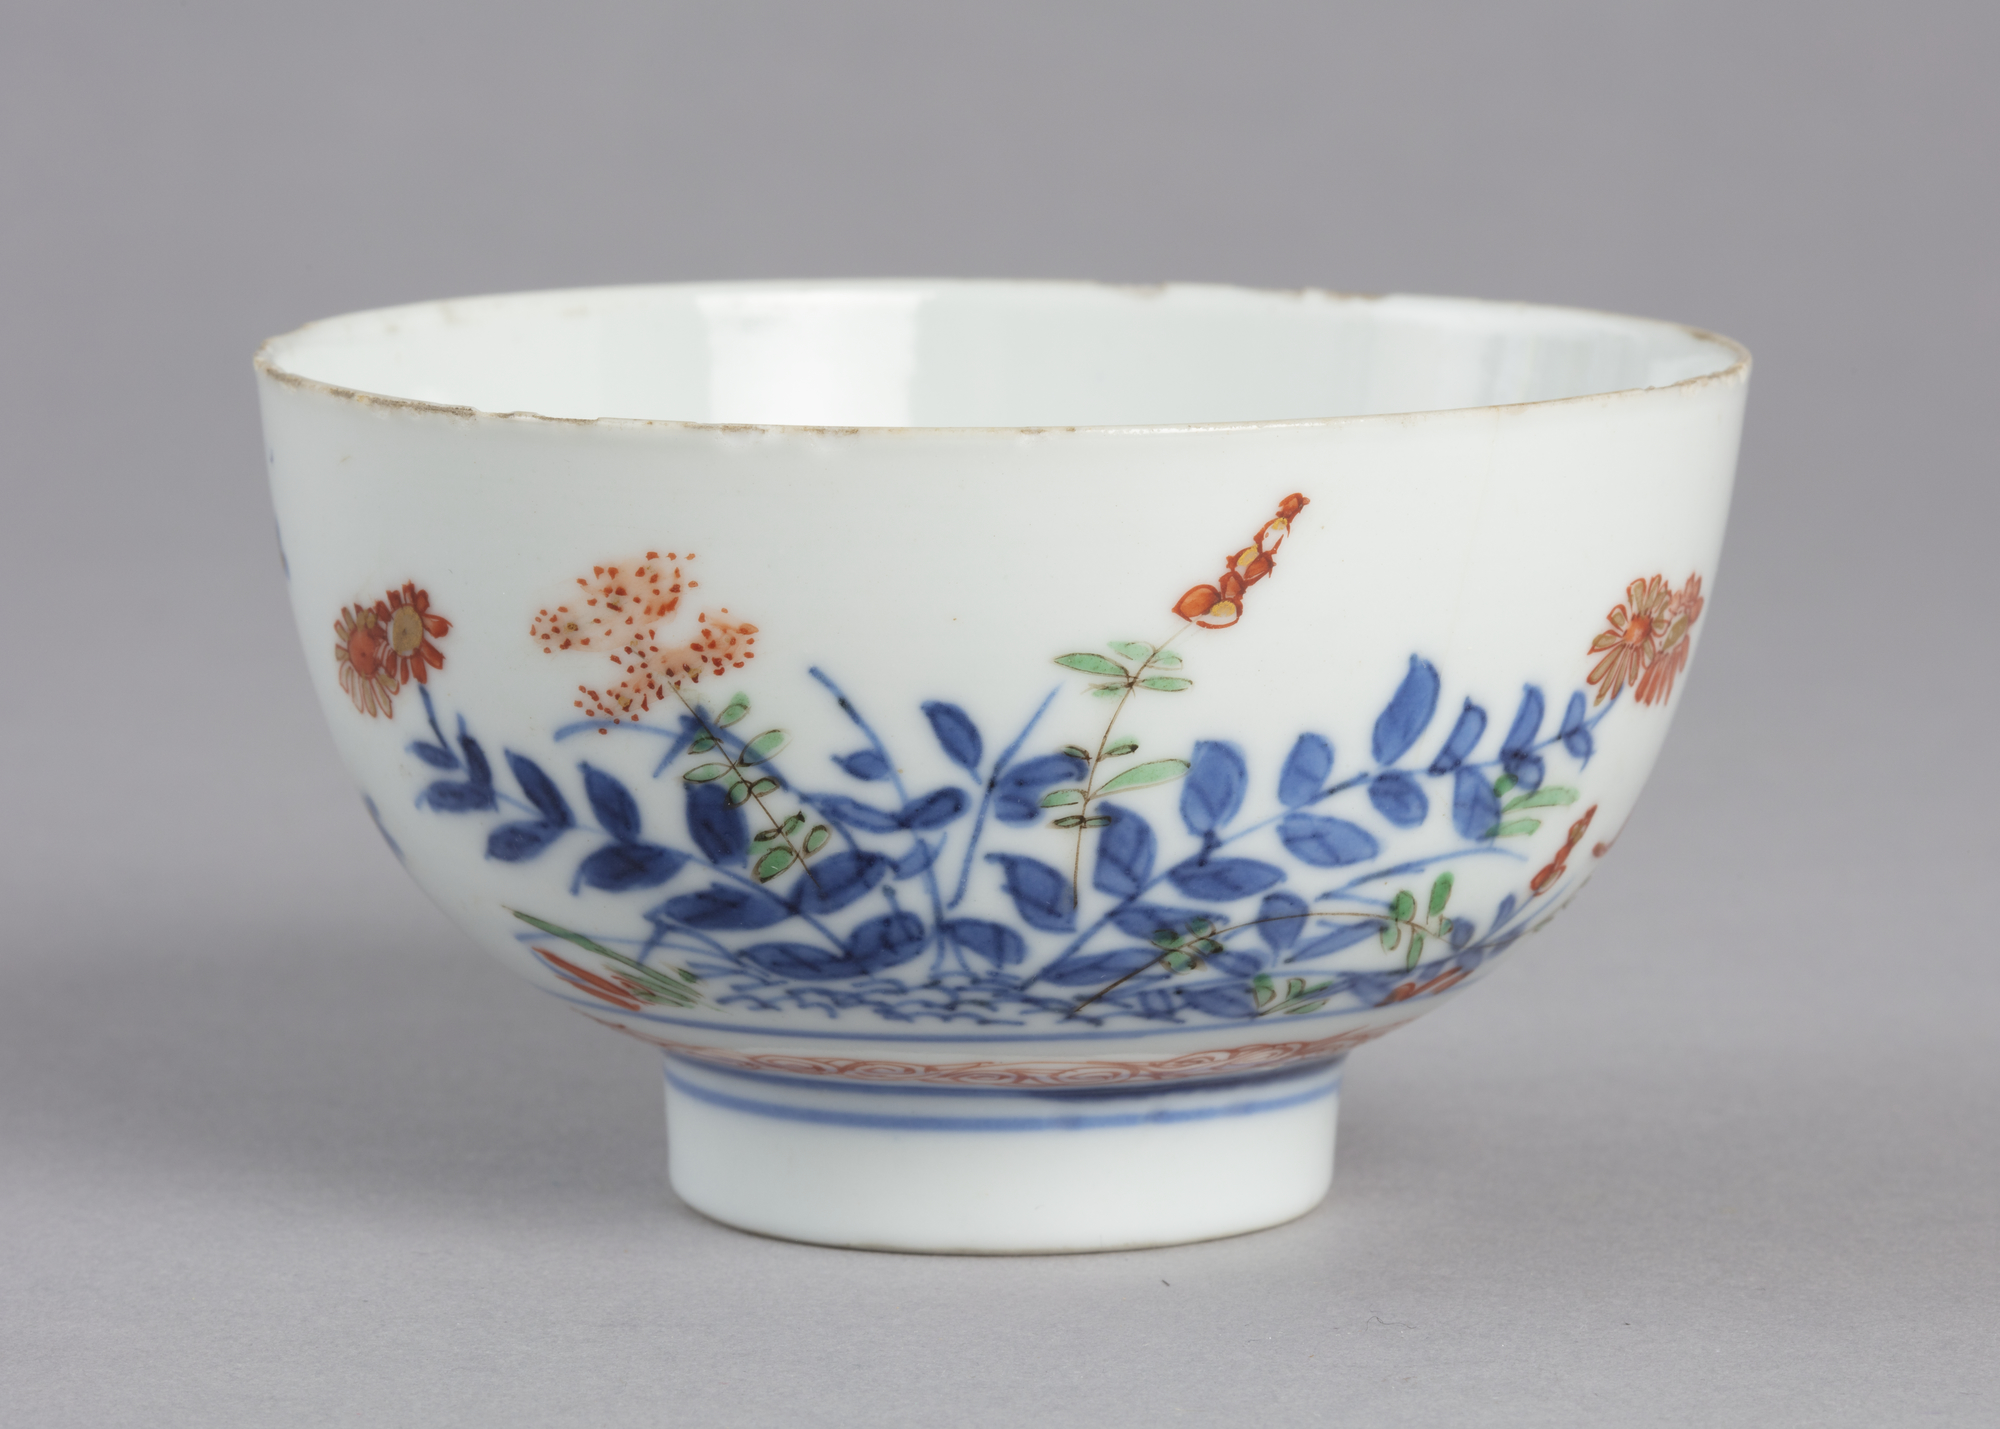 Bowl with design of flowers and grasses in blue, orange and green paint